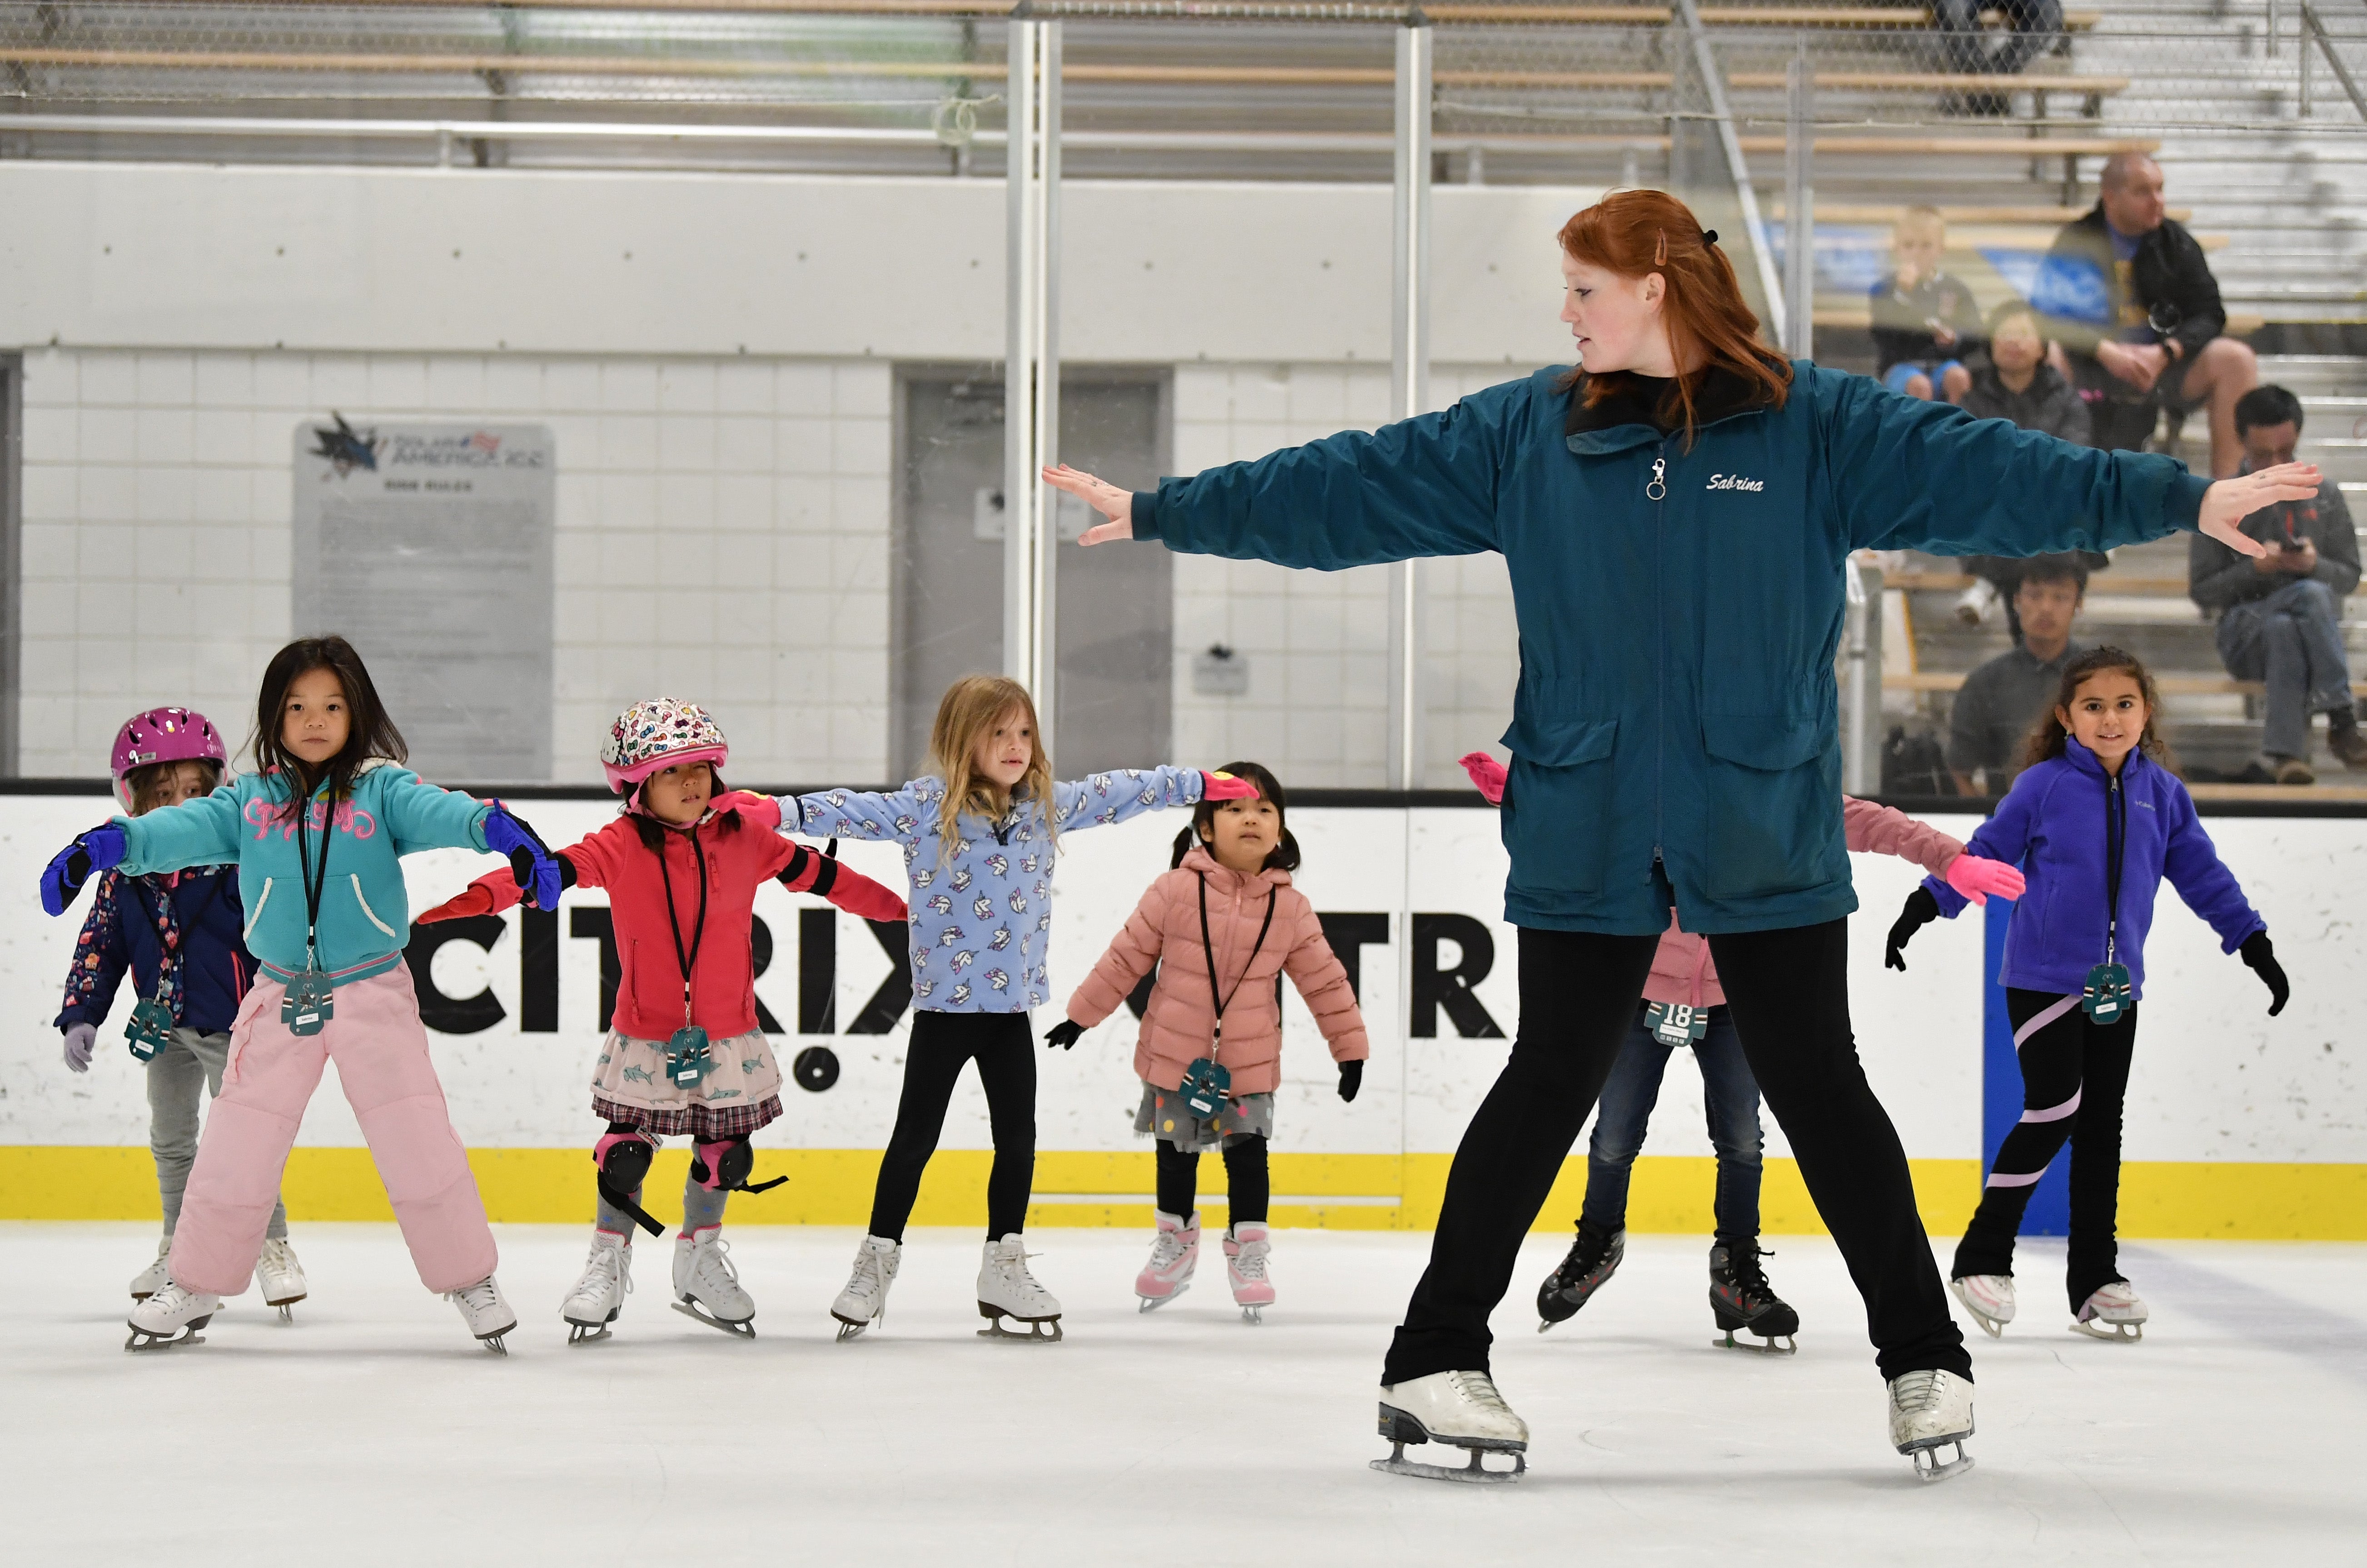 It's ice skating season in Seattle. Sharpen your skills with this